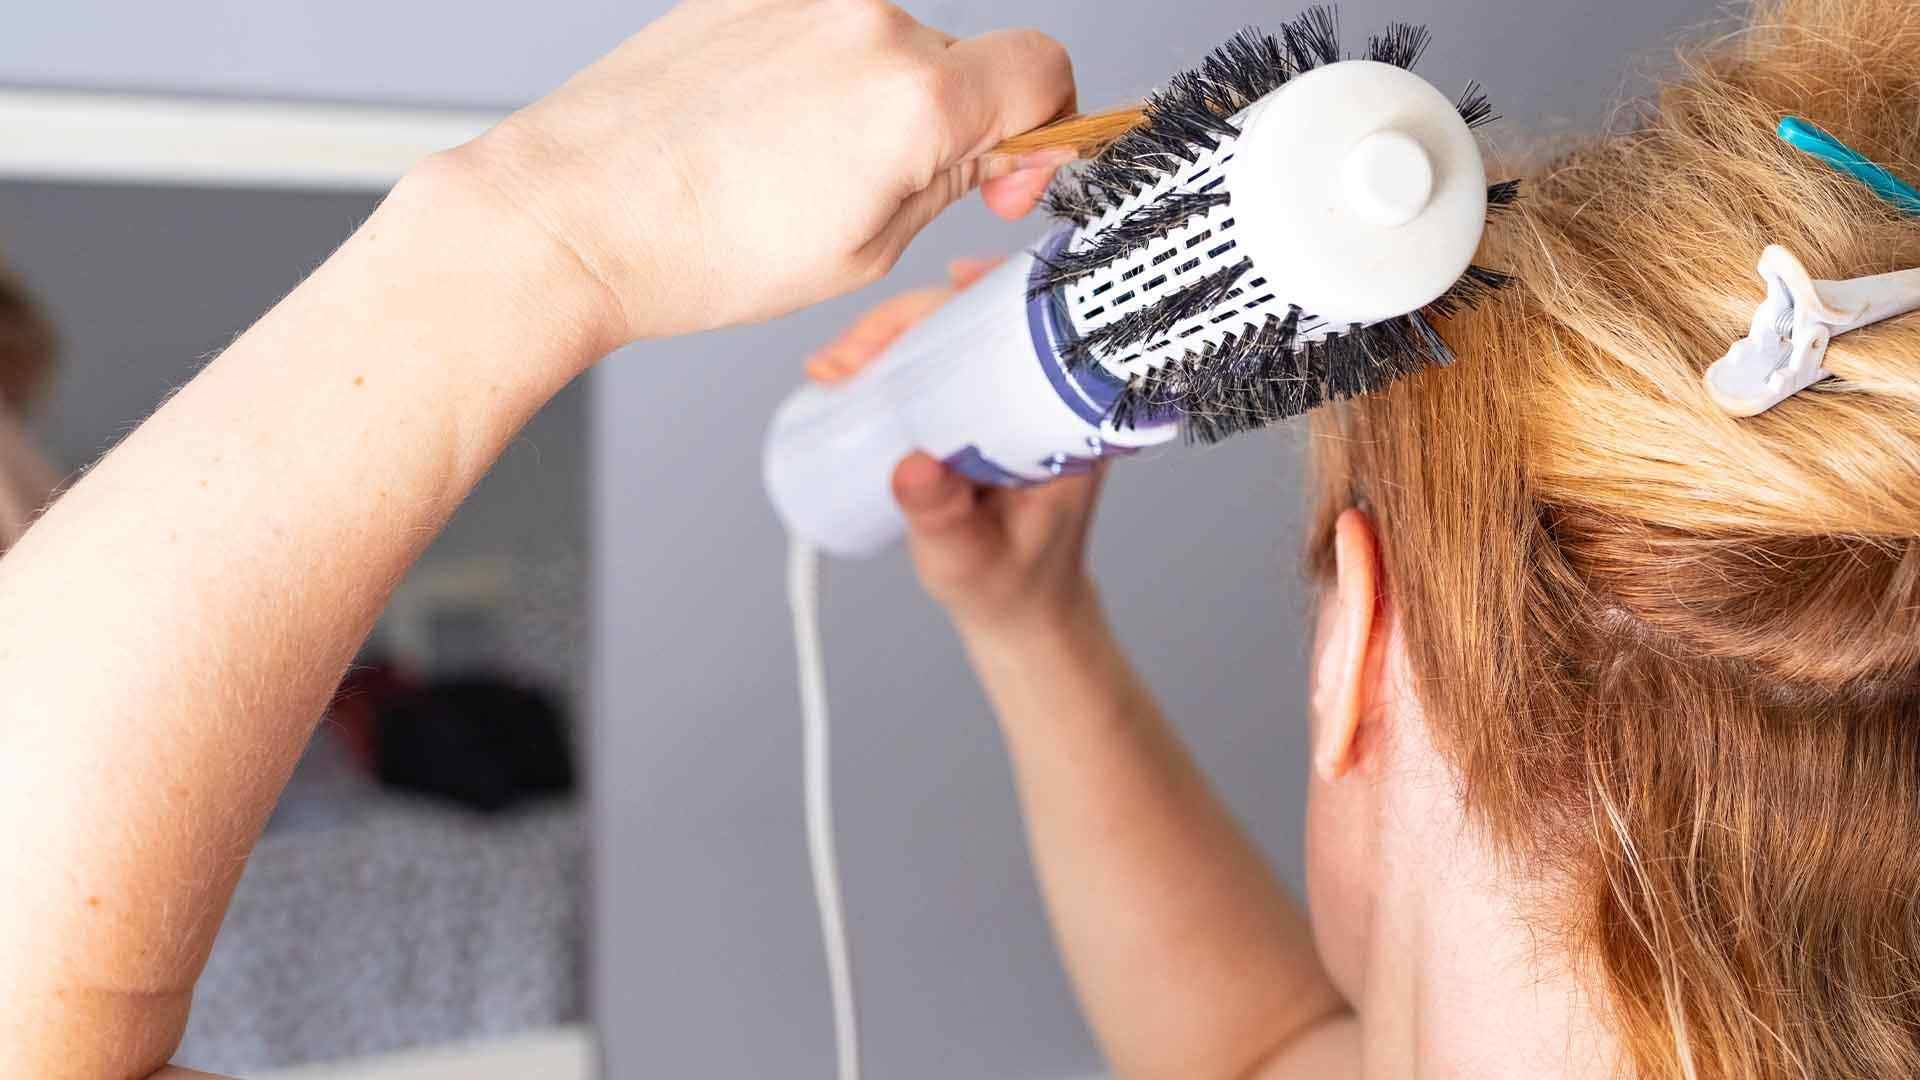 How To Clean A Hair Dryer Brush